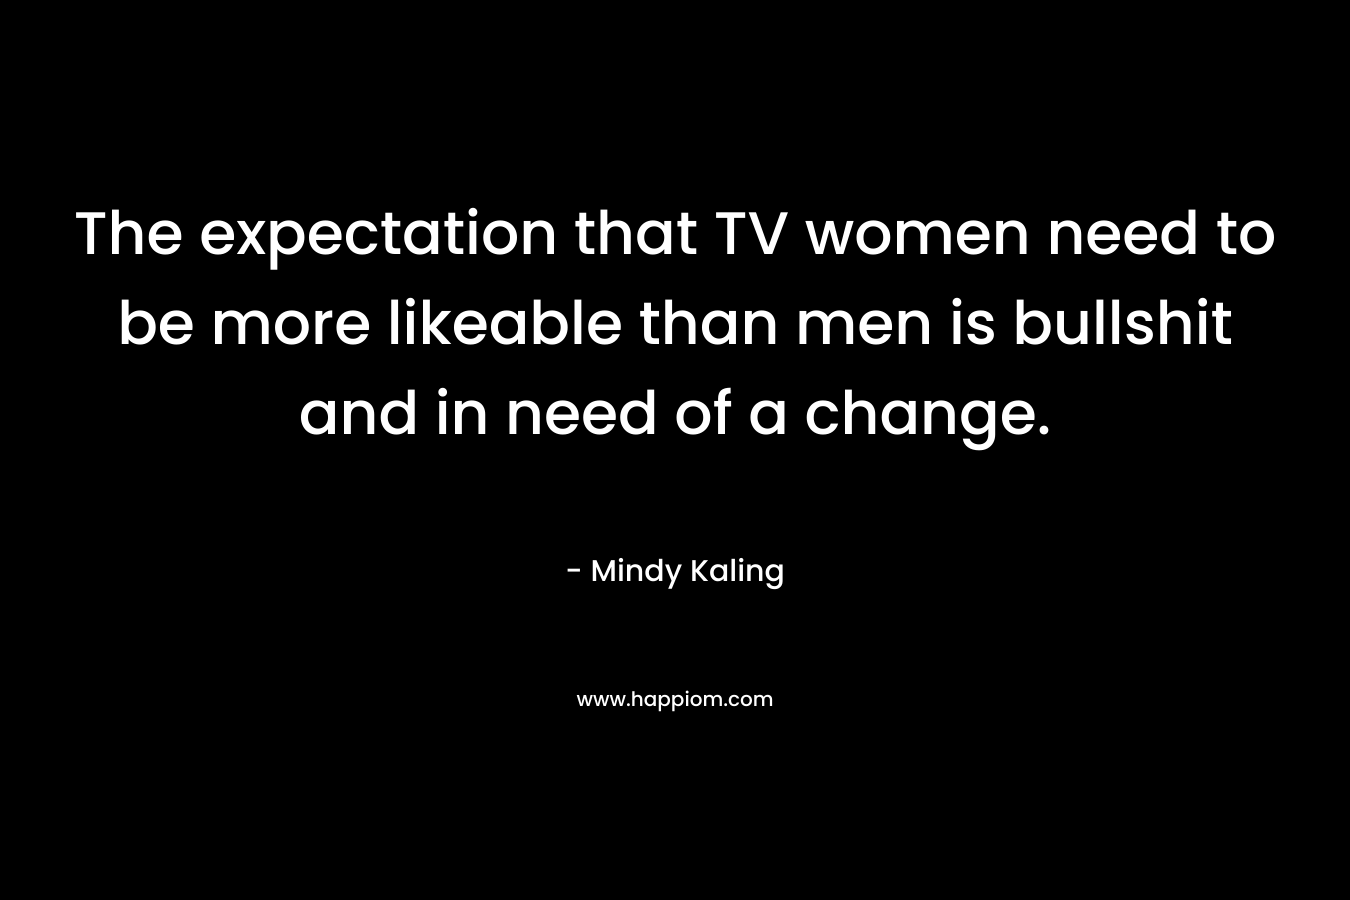 The expectation that TV women need to be more likeable than men is bullshit and in need of a change. – Mindy Kaling